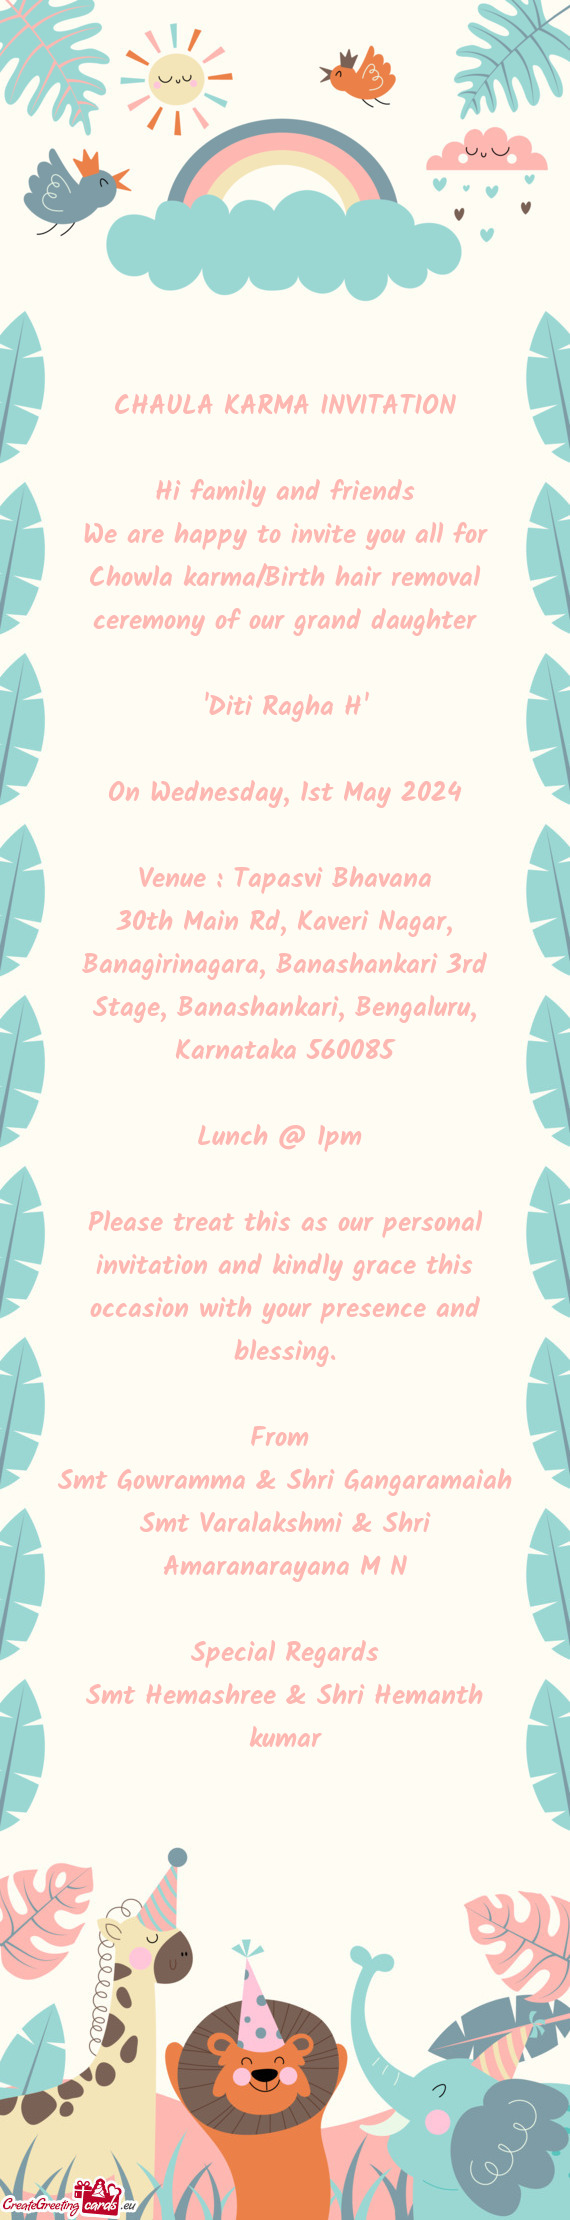 We are happy to invite you all for Chowla karma/Birth hair removal ceremony of our grand daughter